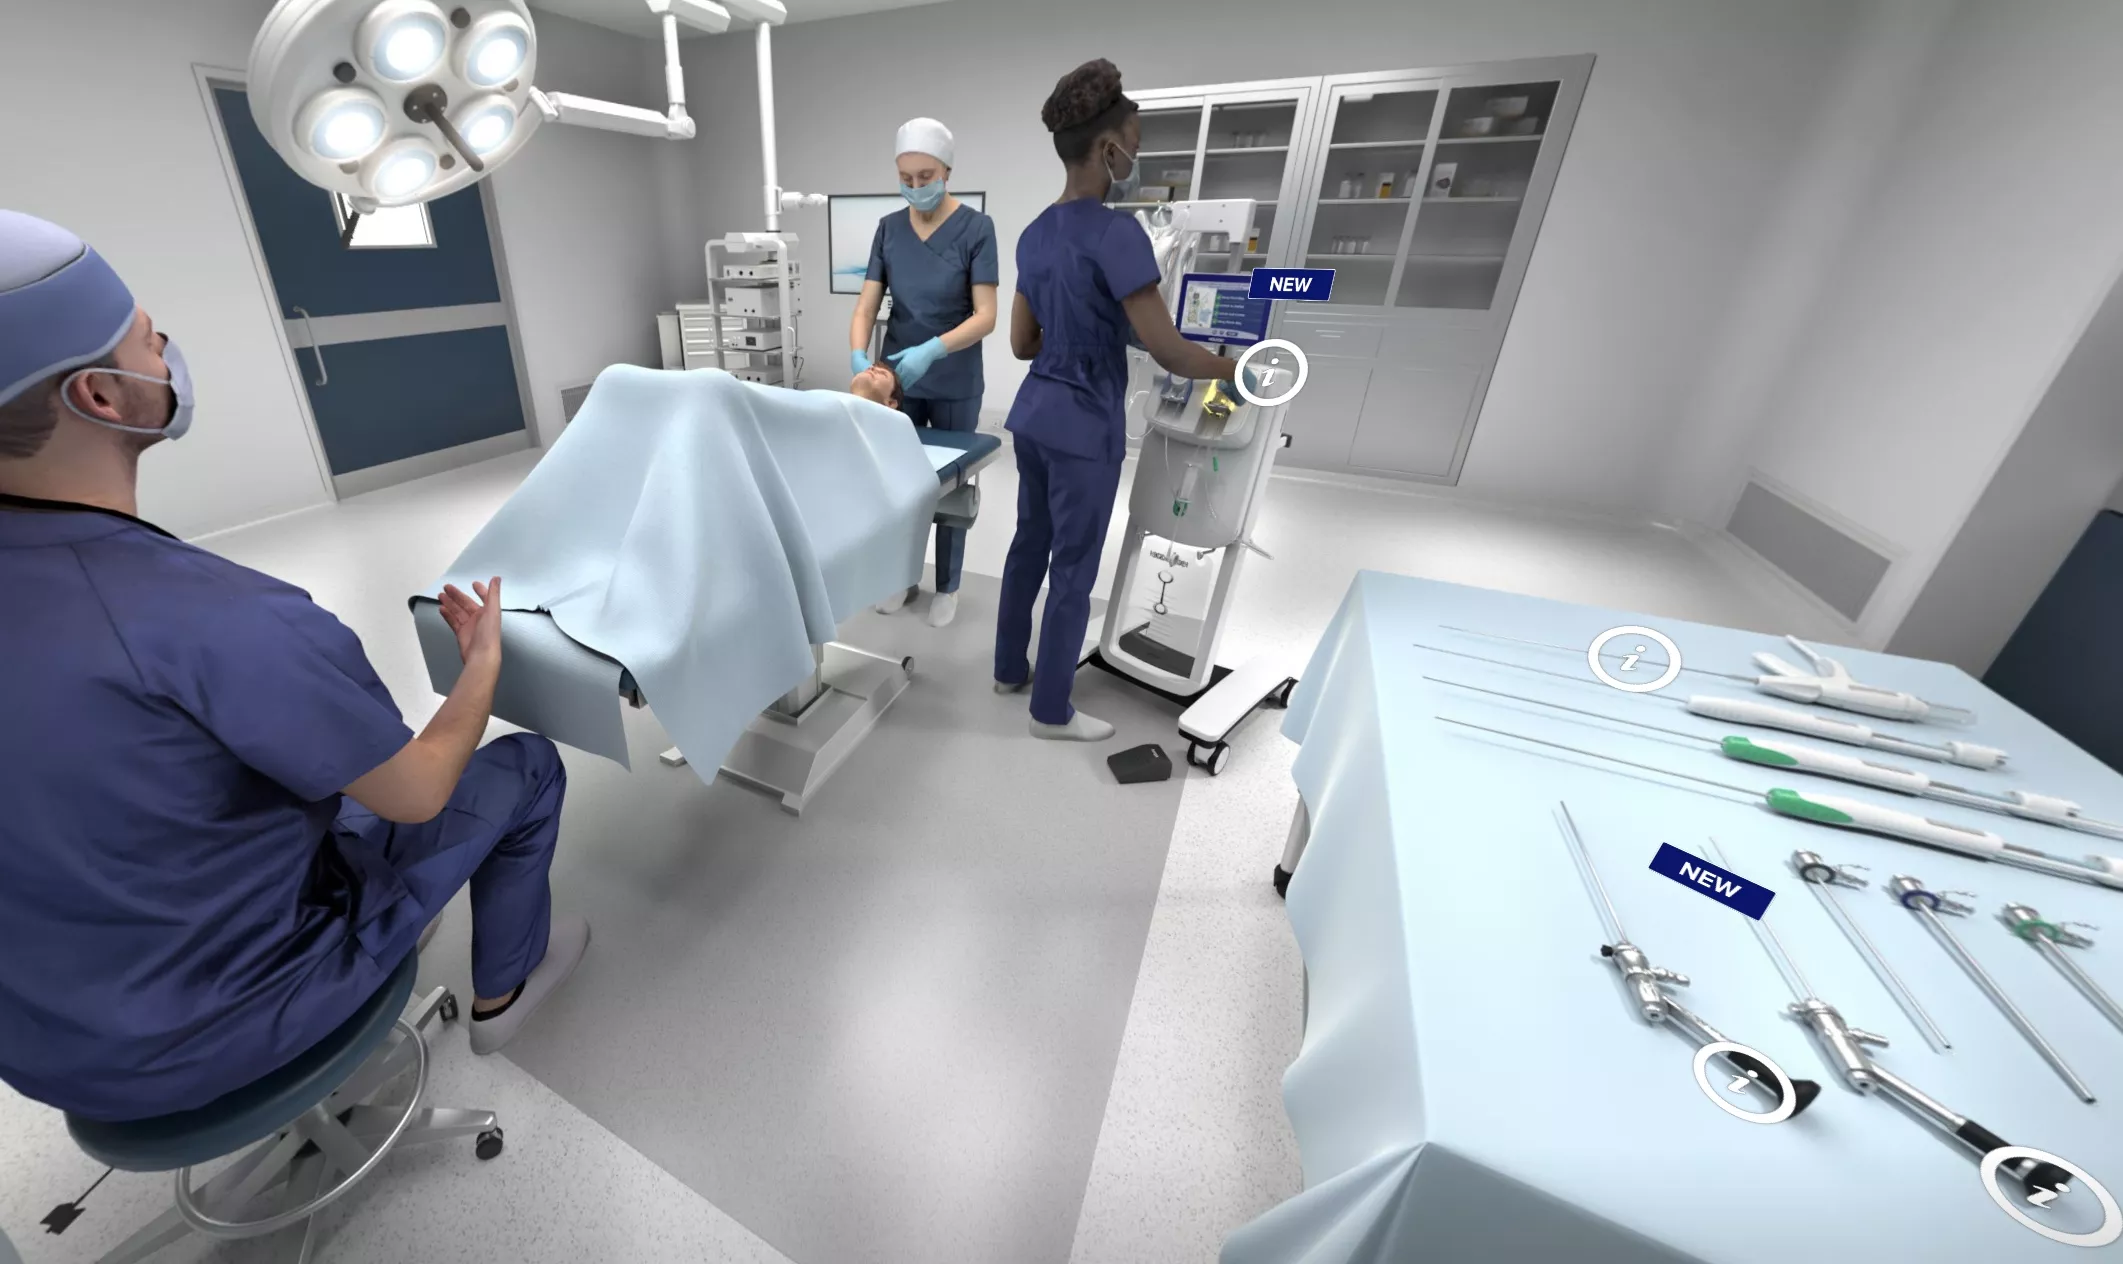 Image of virtual operating room with surgeons and patient